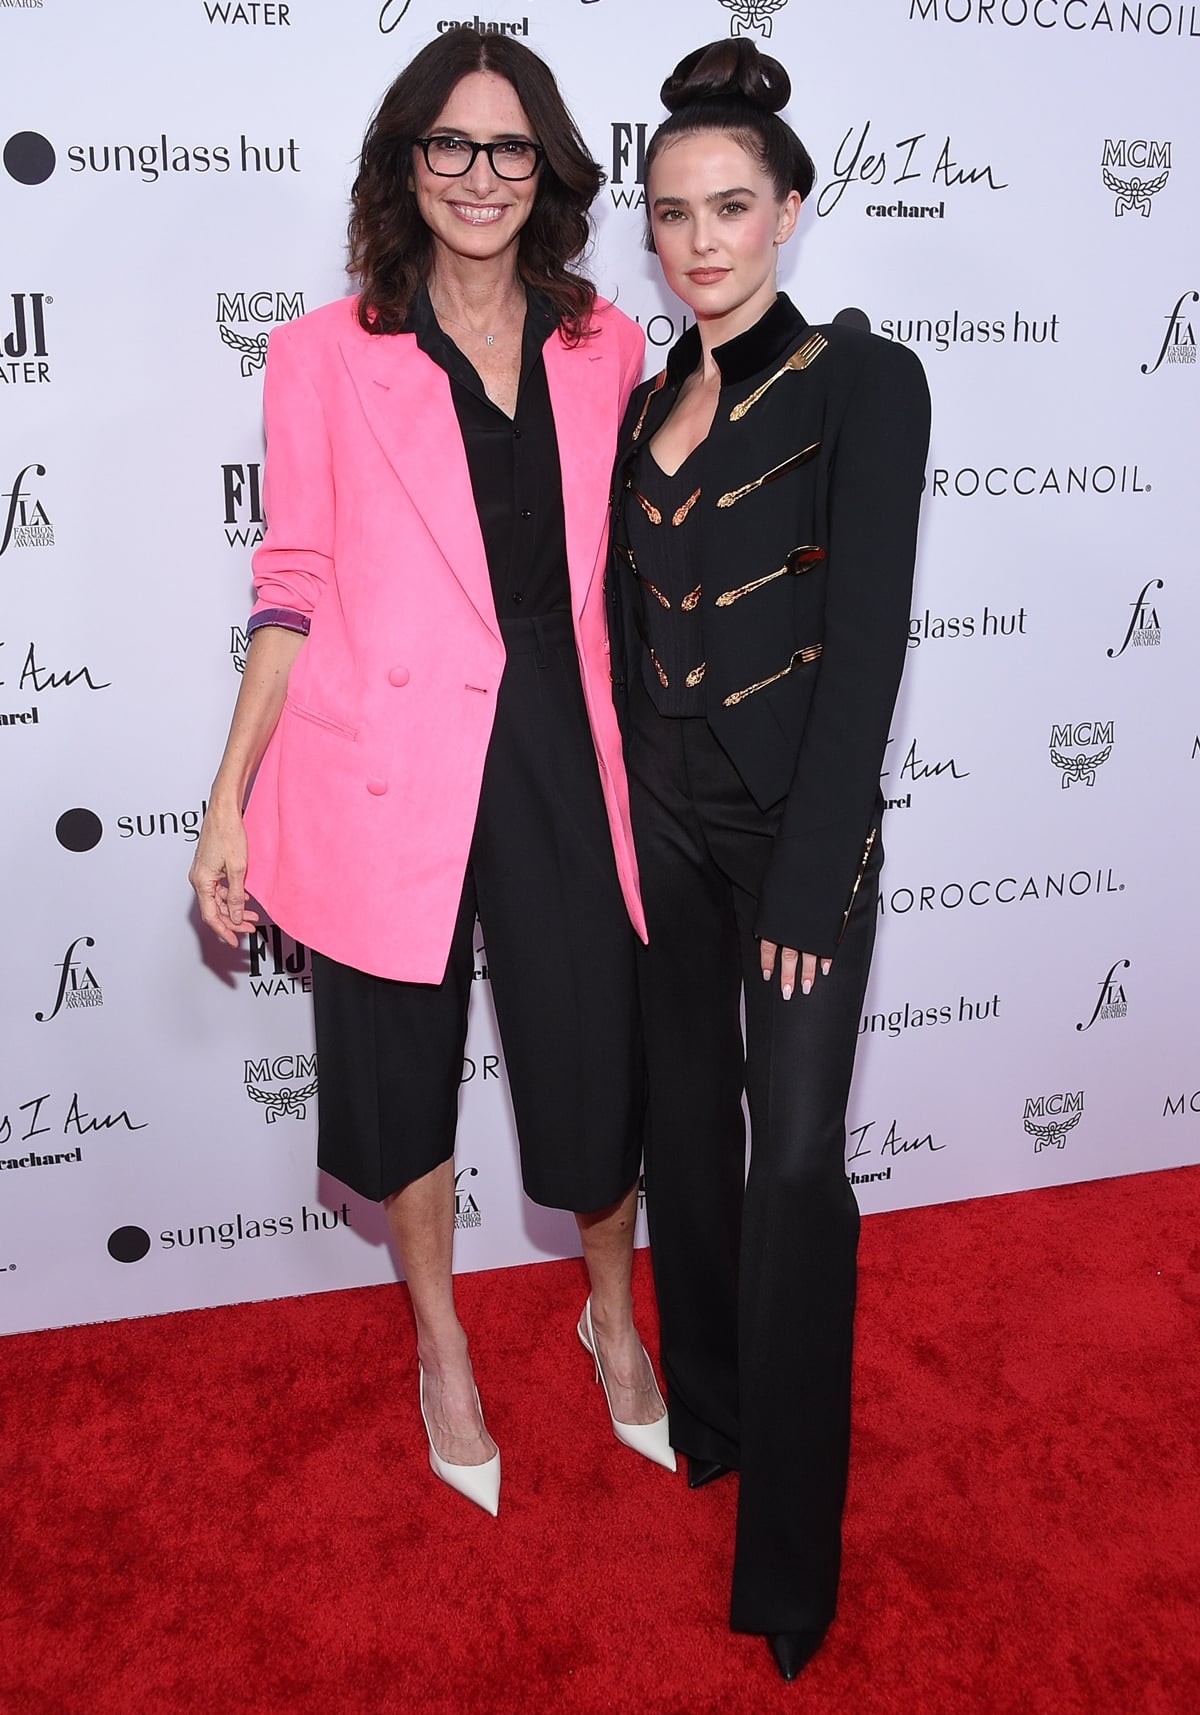 Zoey Deutch in Moschino (R) and Elizabeth Stewart attend The Daily Front Row's 6th Annual Fashion Los Angeles Awards